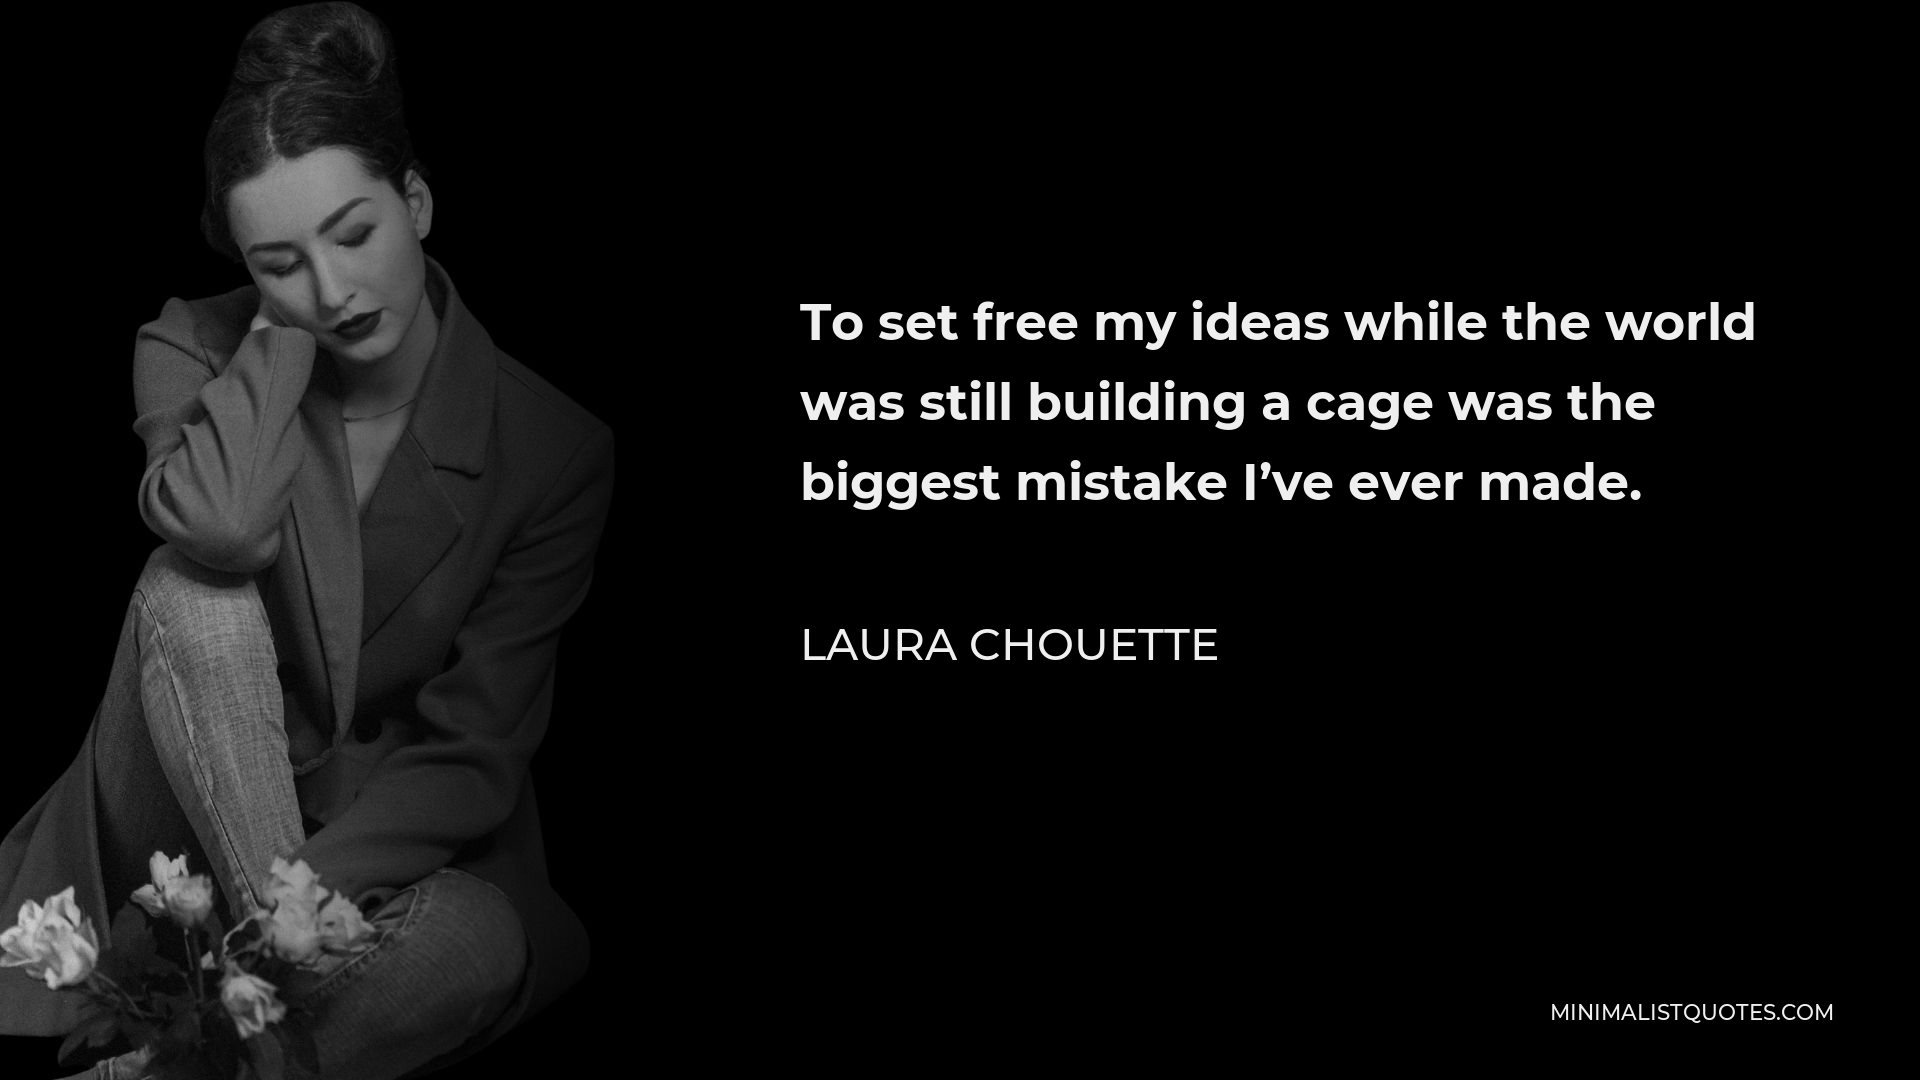 Laura Chouette Quote - To set free my ideas while the world was still building a cage was the biggest mistake I’ve ever made.